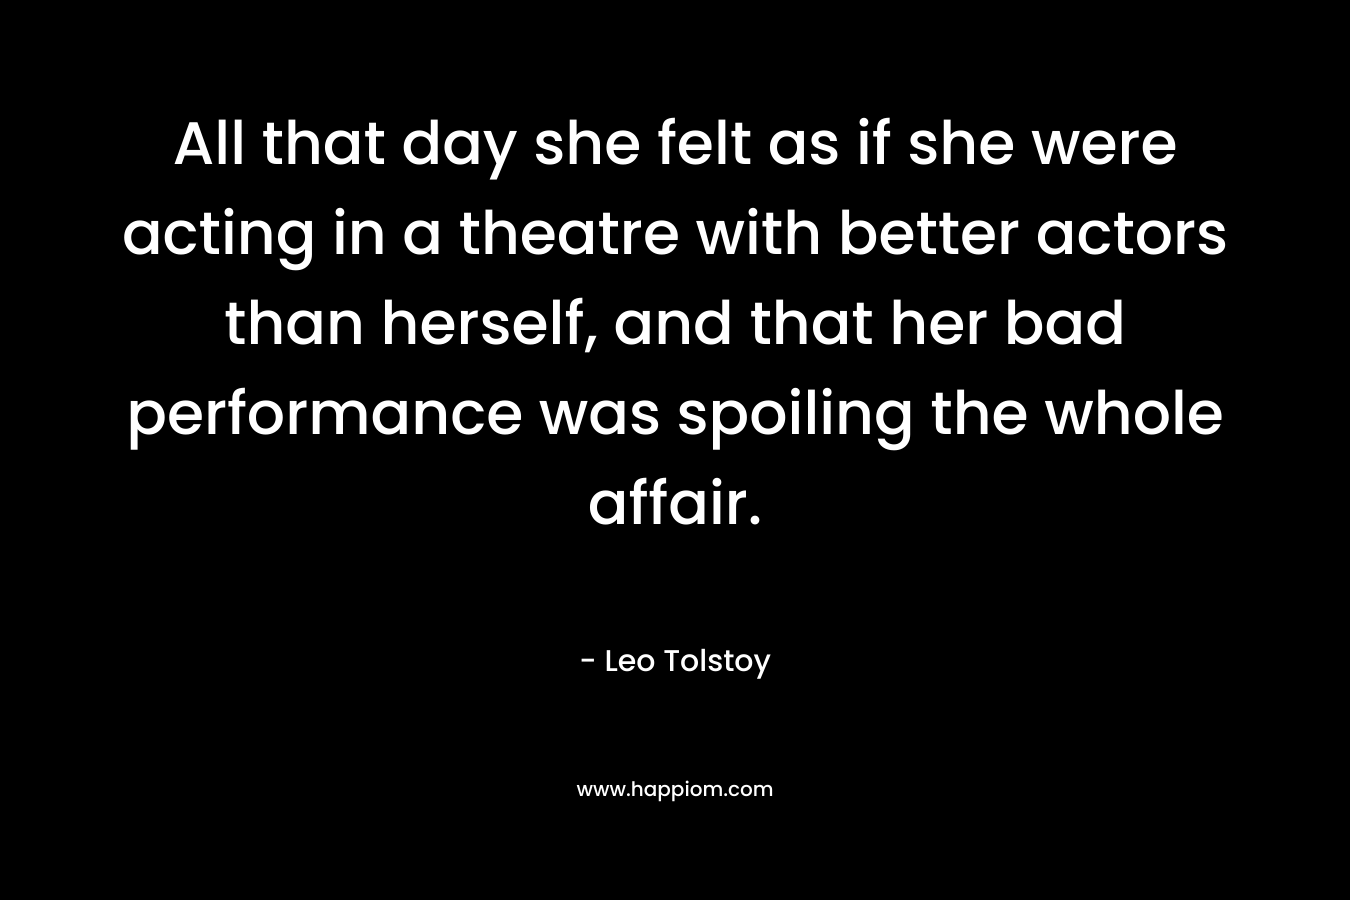 All that day she felt as if she were acting in a theatre with better actors than herself, and that her bad performance was spoiling the whole affair. – Leo Tolstoy